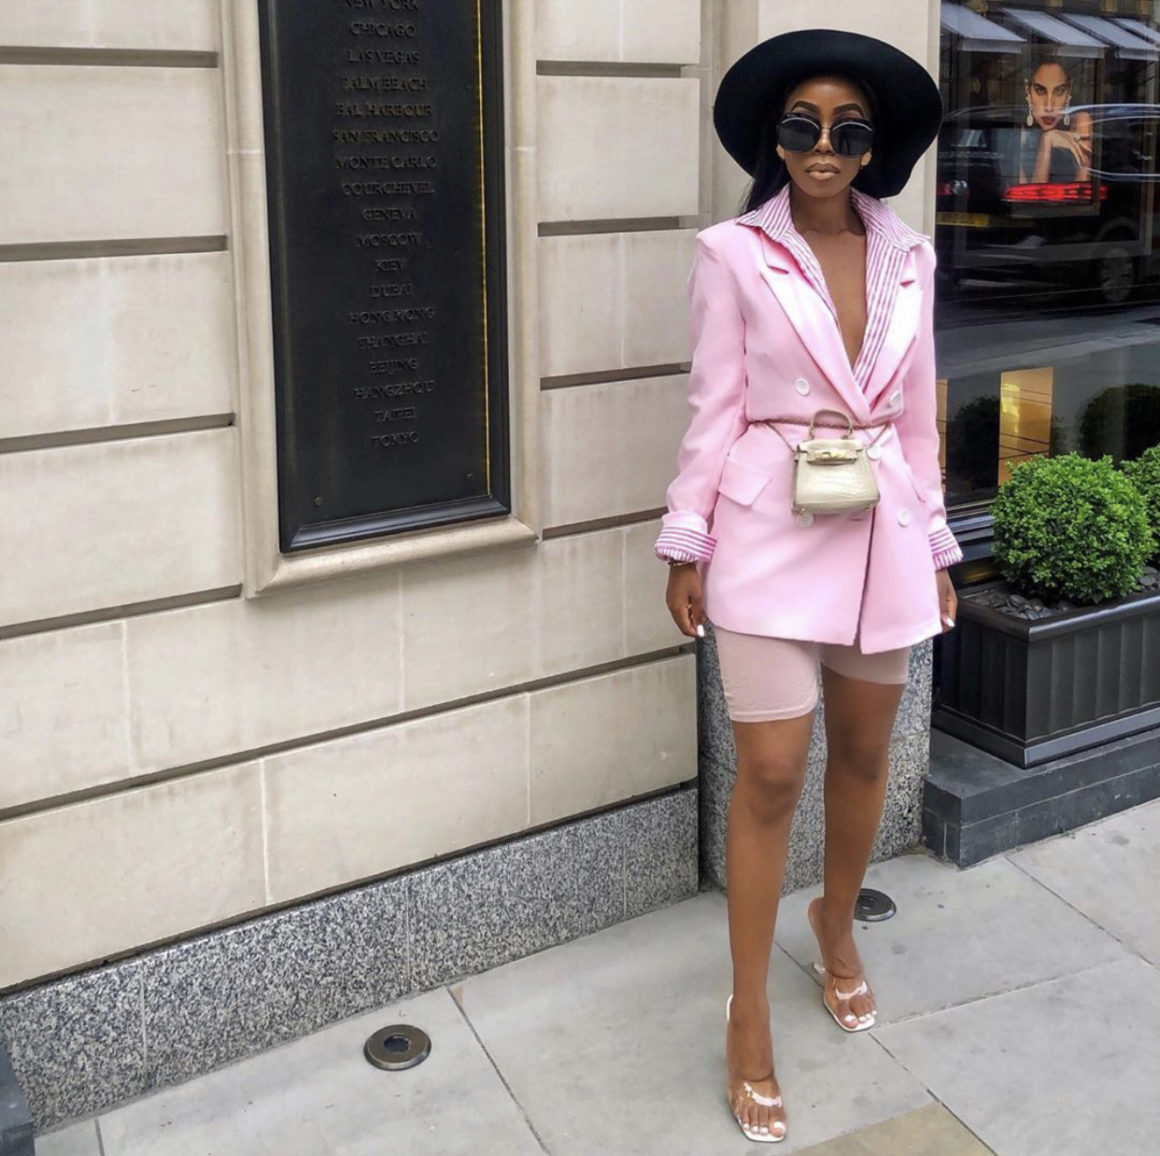 Fashion Bombshell of the Day: Chantelle from London – Fashion Bomb Daily